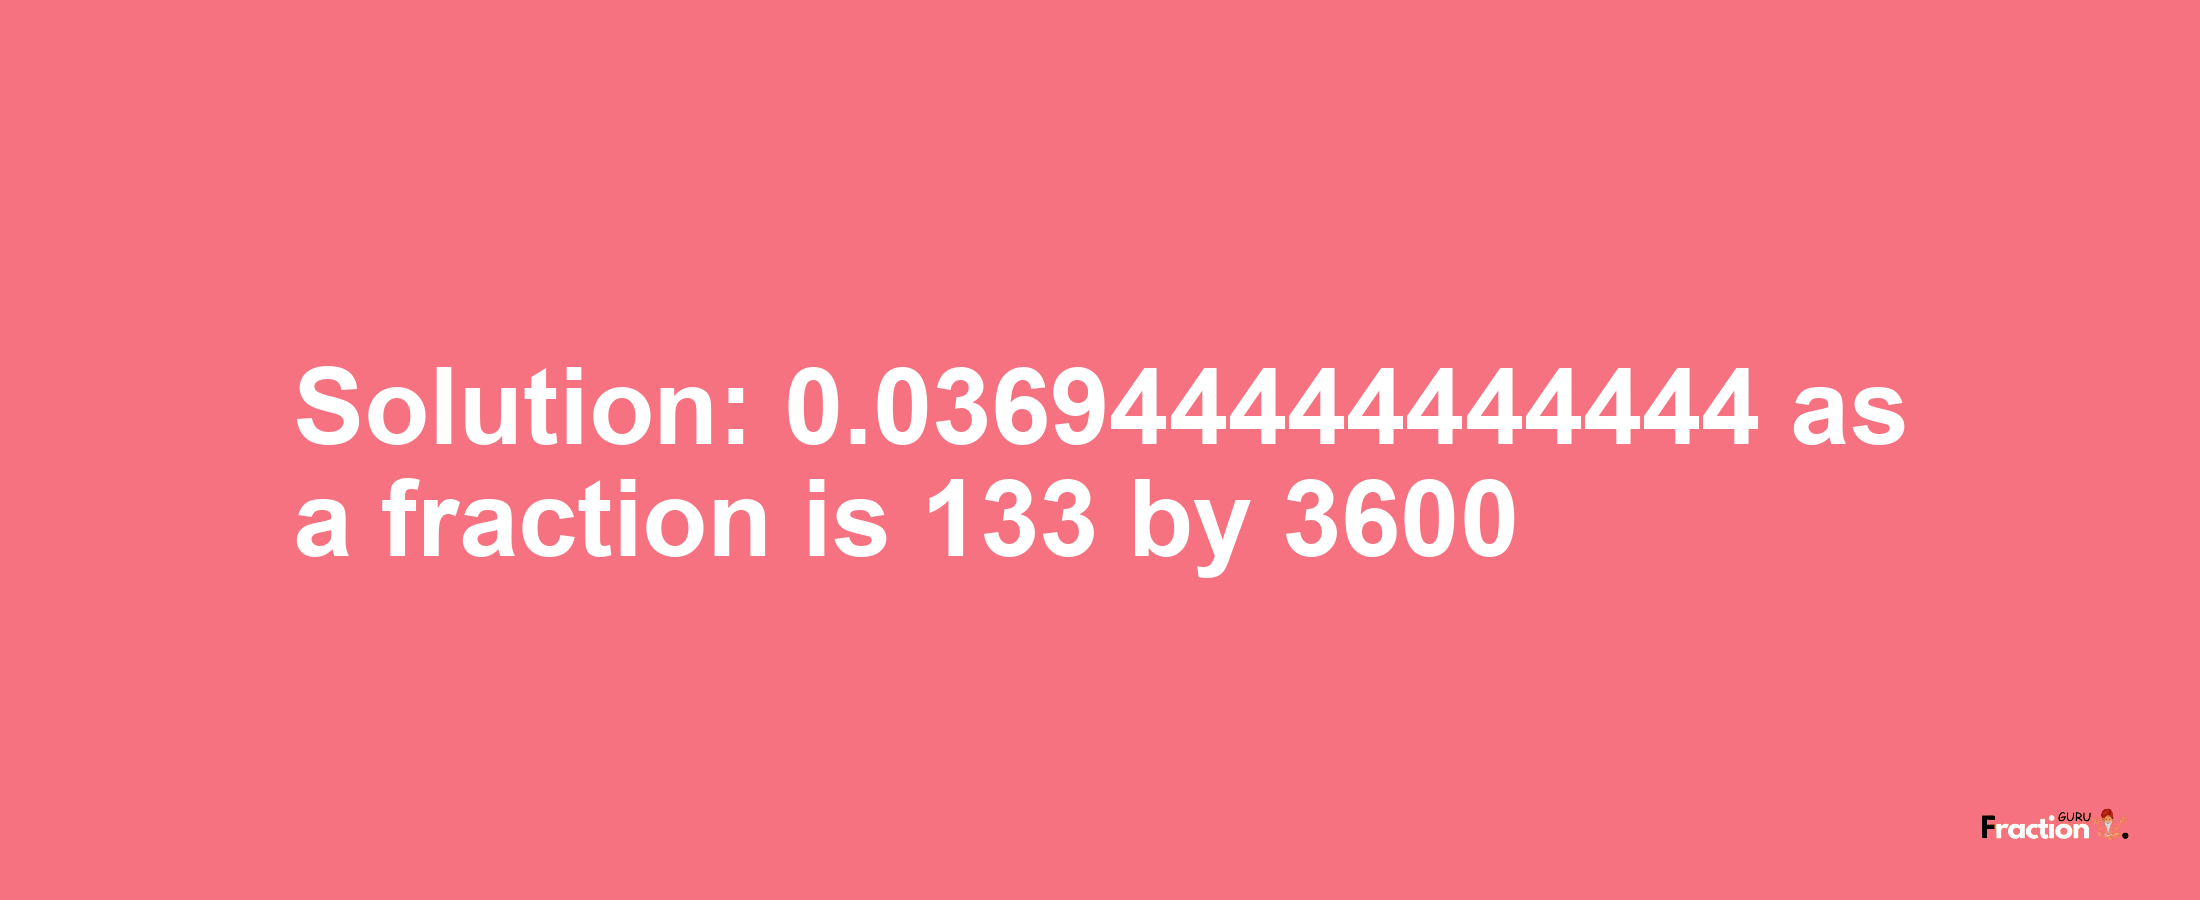 Solution:0.036944444444444 as a fraction is 133/3600